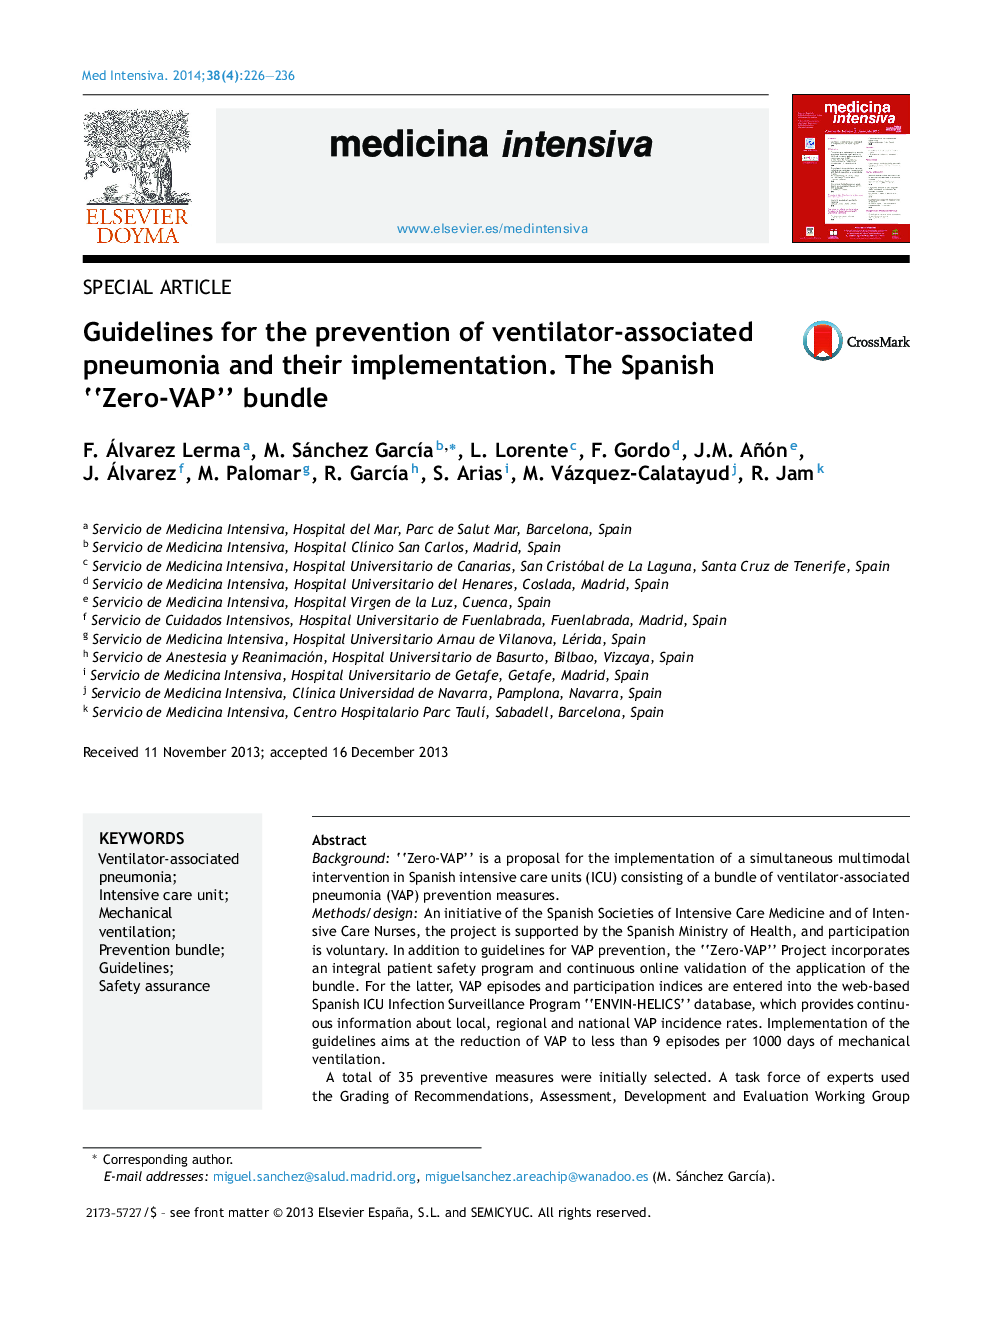 Guidelines for the prevention of ventilator-associated pneumonia and their implementation. The Spanish “Zero-VAP” bundle